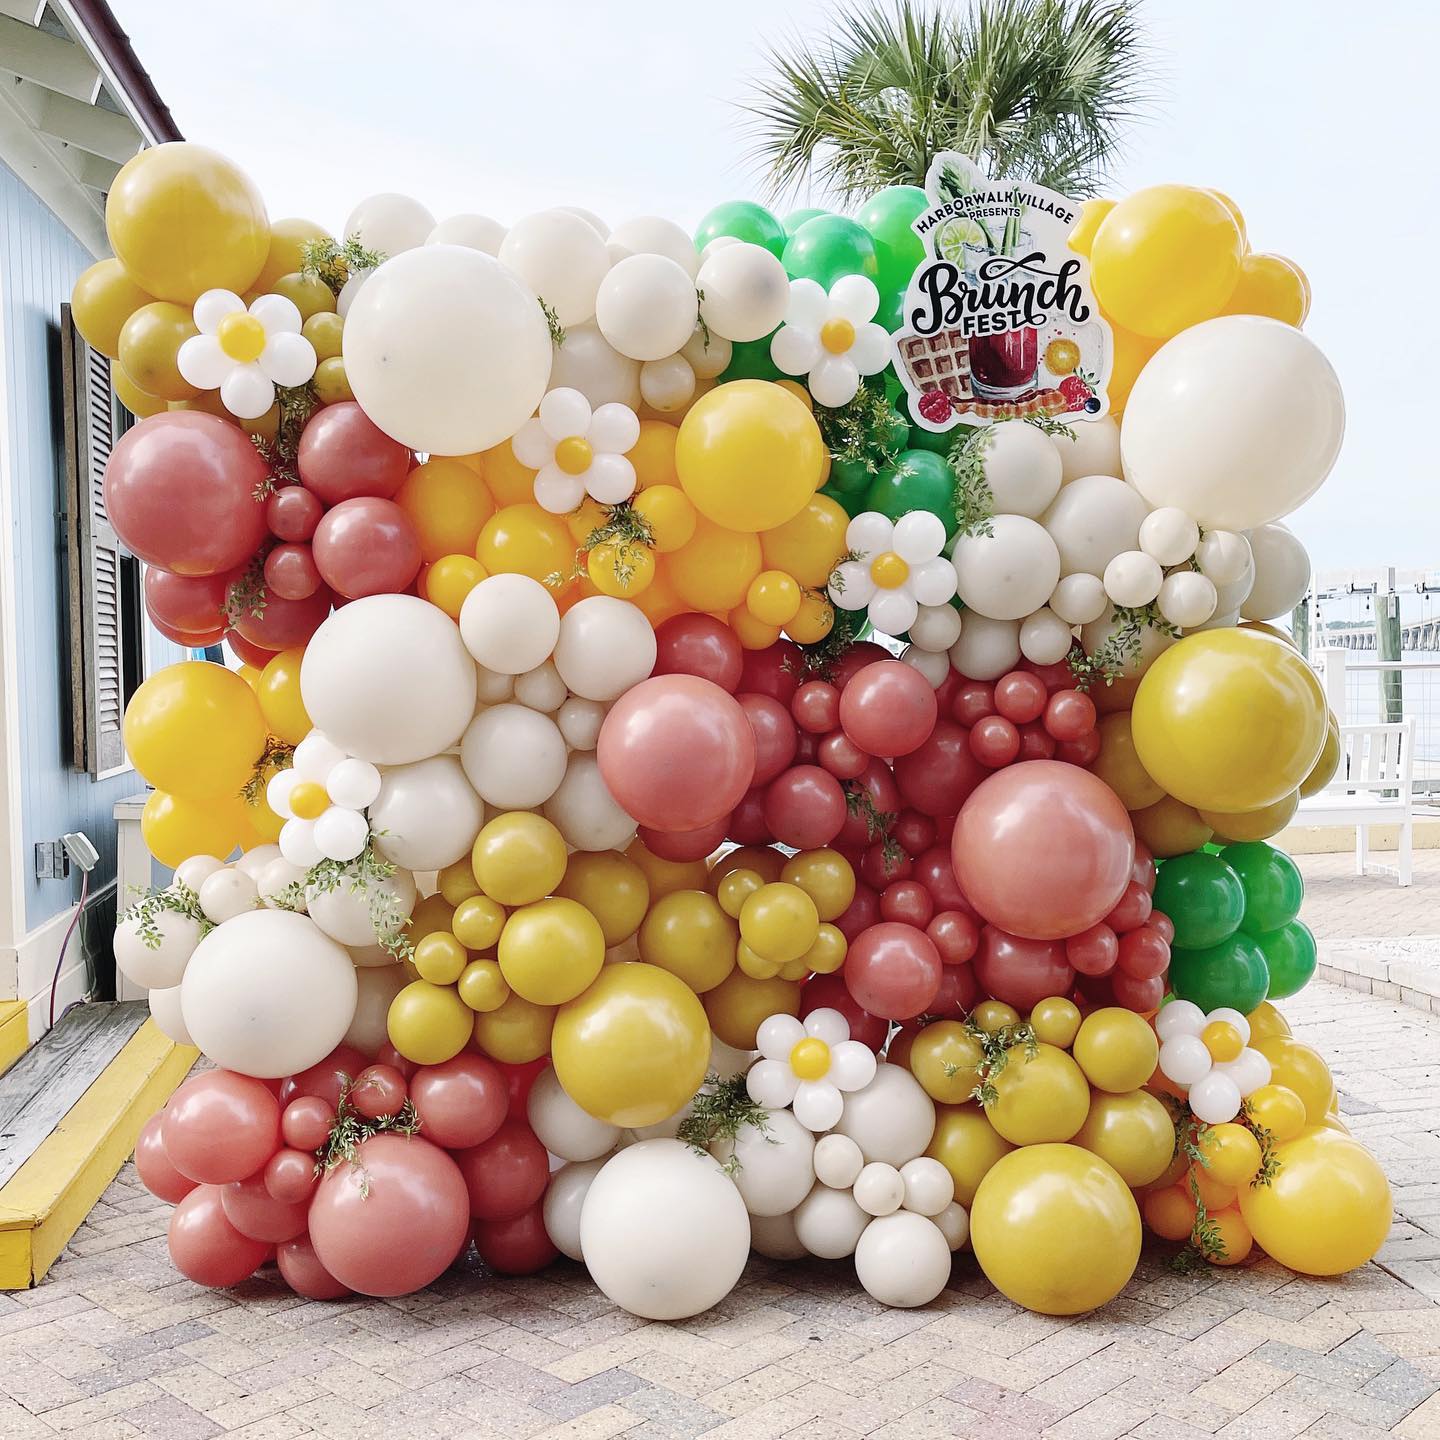 Brunch should be mandatory on Sunday right? The brunch fest at @hwvdestin is a great excuse to try new flavors from our local restaurants so make plans to attend this fun event in 2023!

#balloonwall #balloonbackdrop #balloondecor #ballooninstallation #ballooninspiration #balloonstylist #destinballoons #fallballoons #destin #destinevents #destinflorida #photobackdrop #selfiesunday